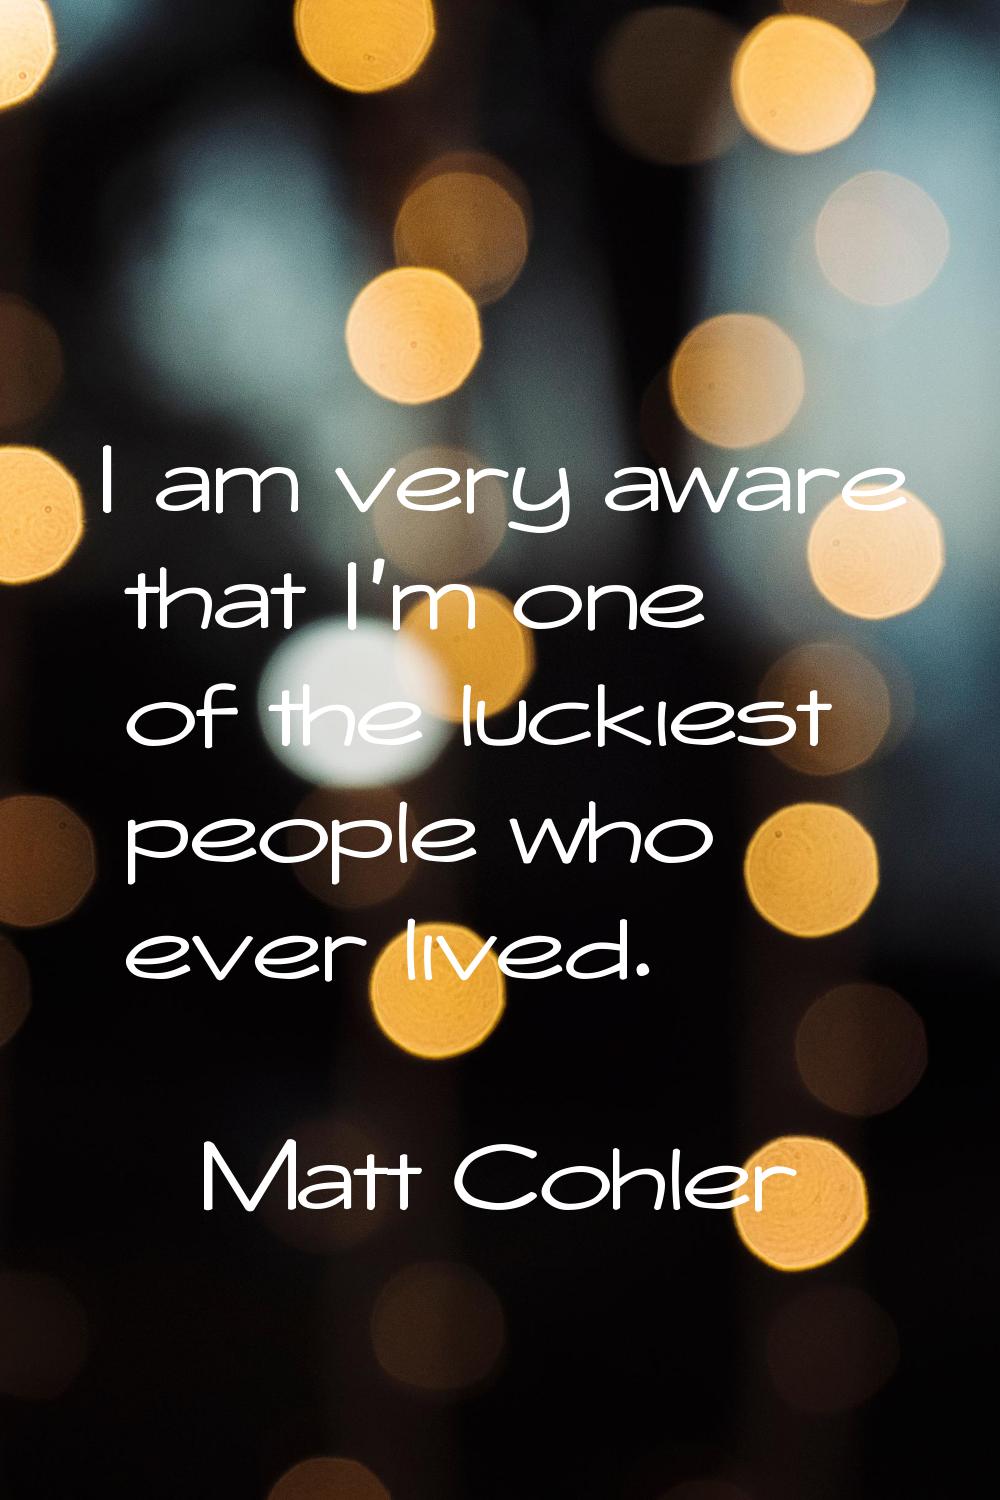 I am very aware that I'm one of the luckiest people who ever lived.